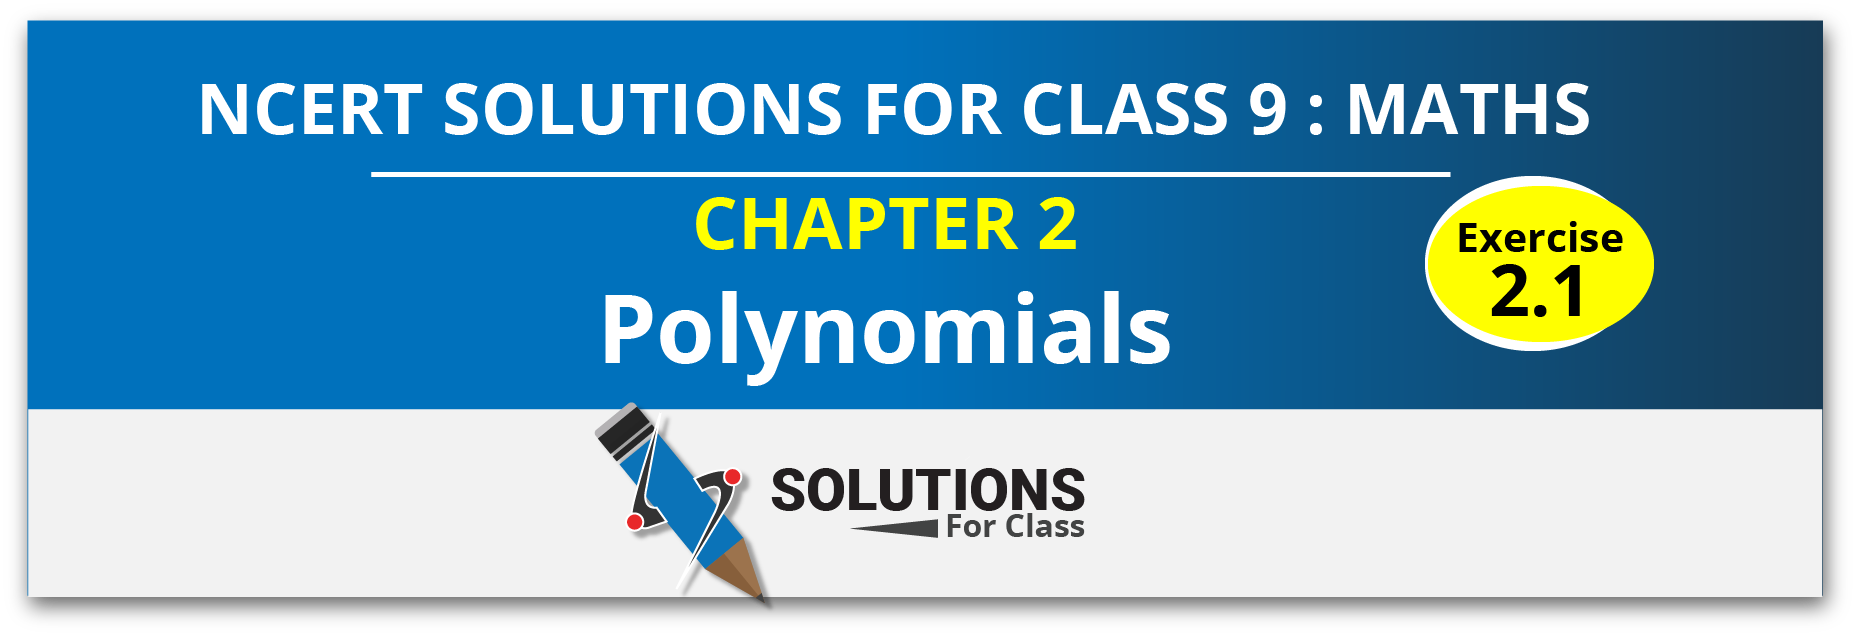 NCERT Solution For Class 9, Maths, Chapter 2, Polynomials, Exercise 2.1